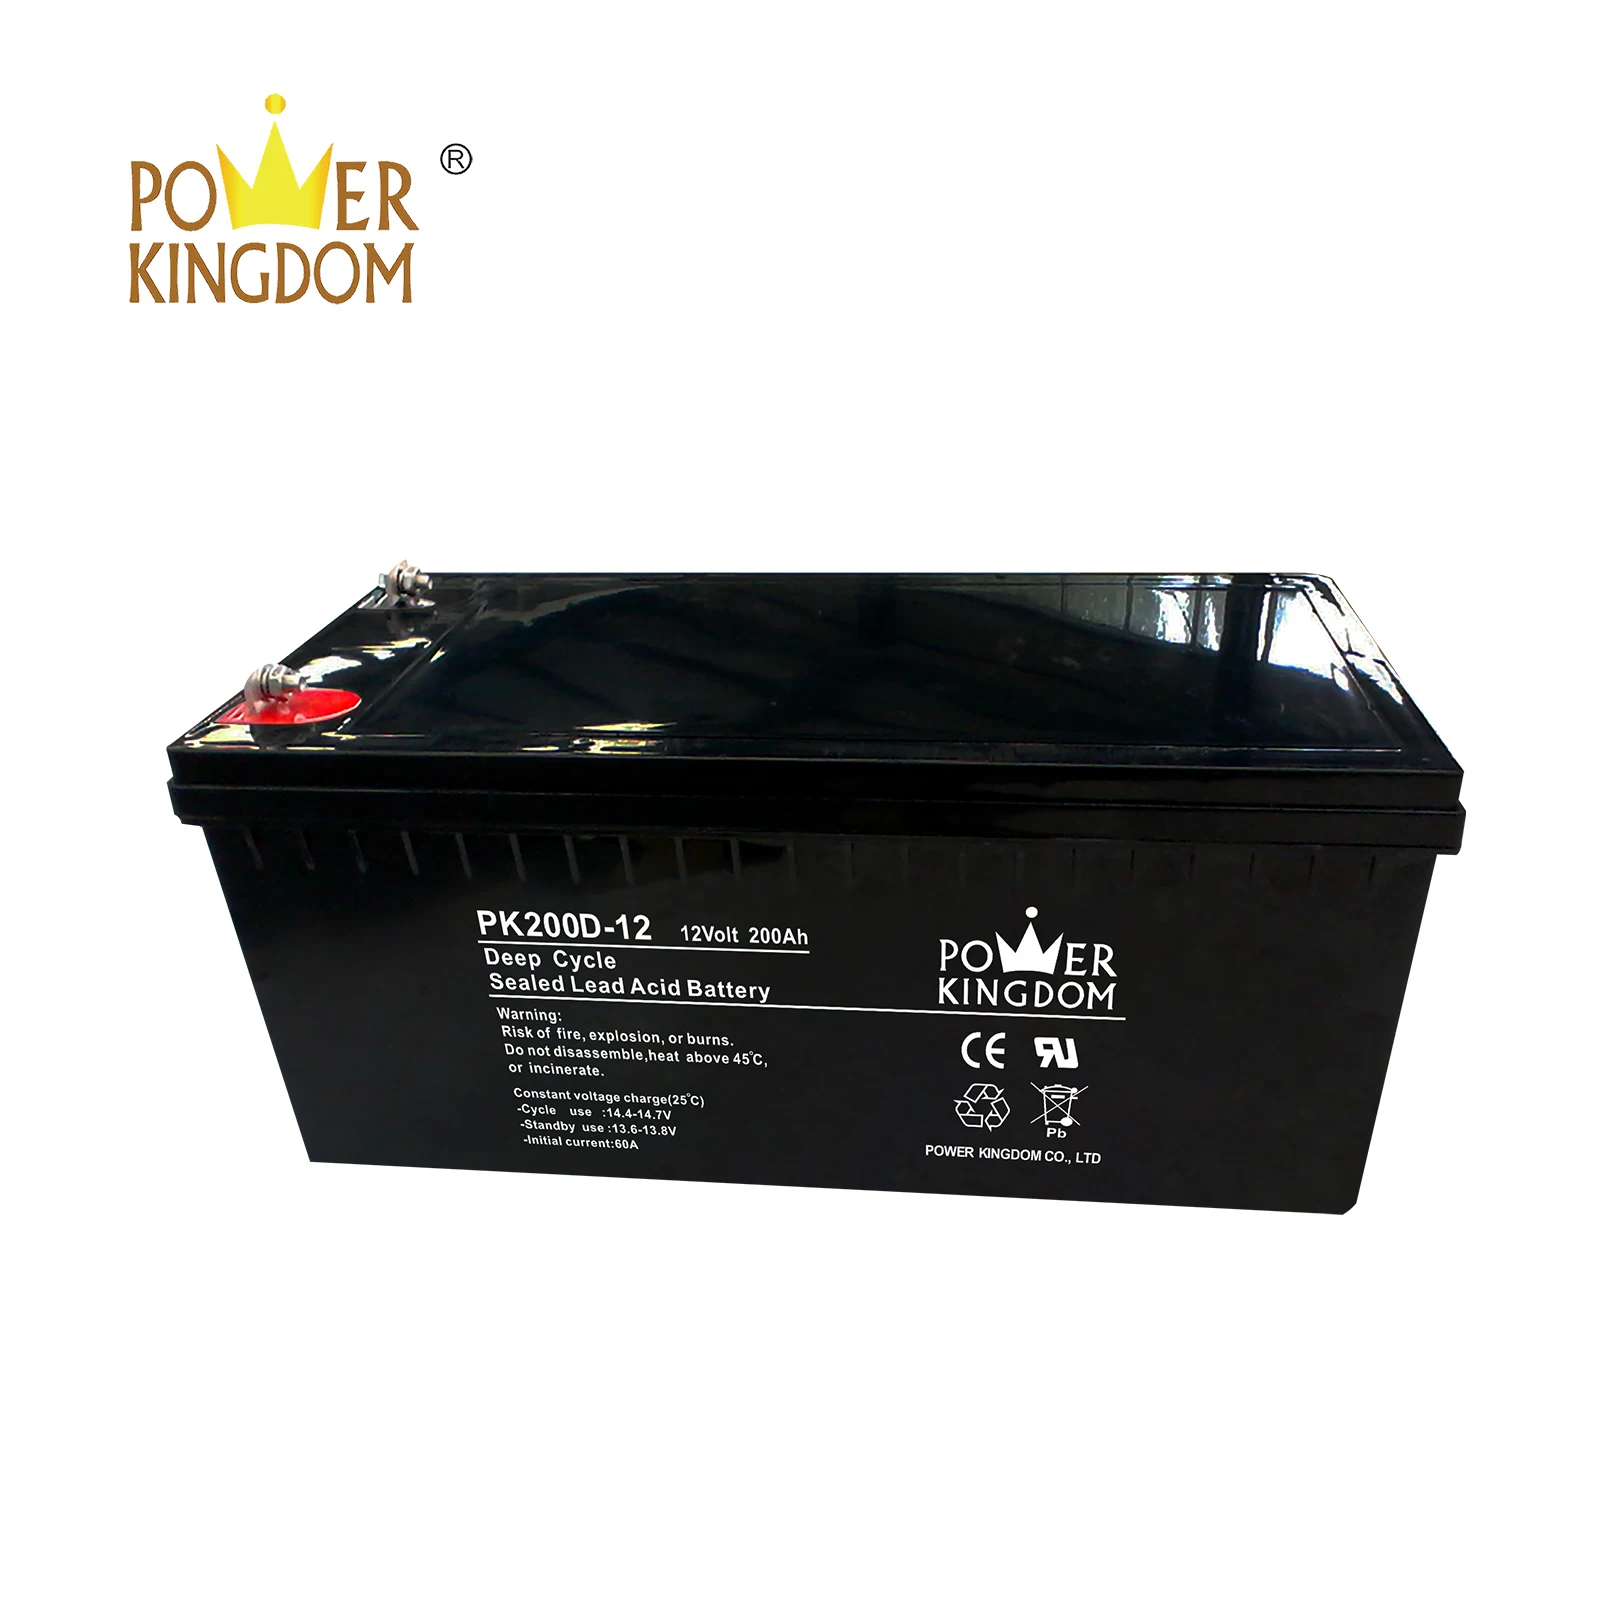 Power Kingdom agm deep cycle marine battery manufacturers wind power systems